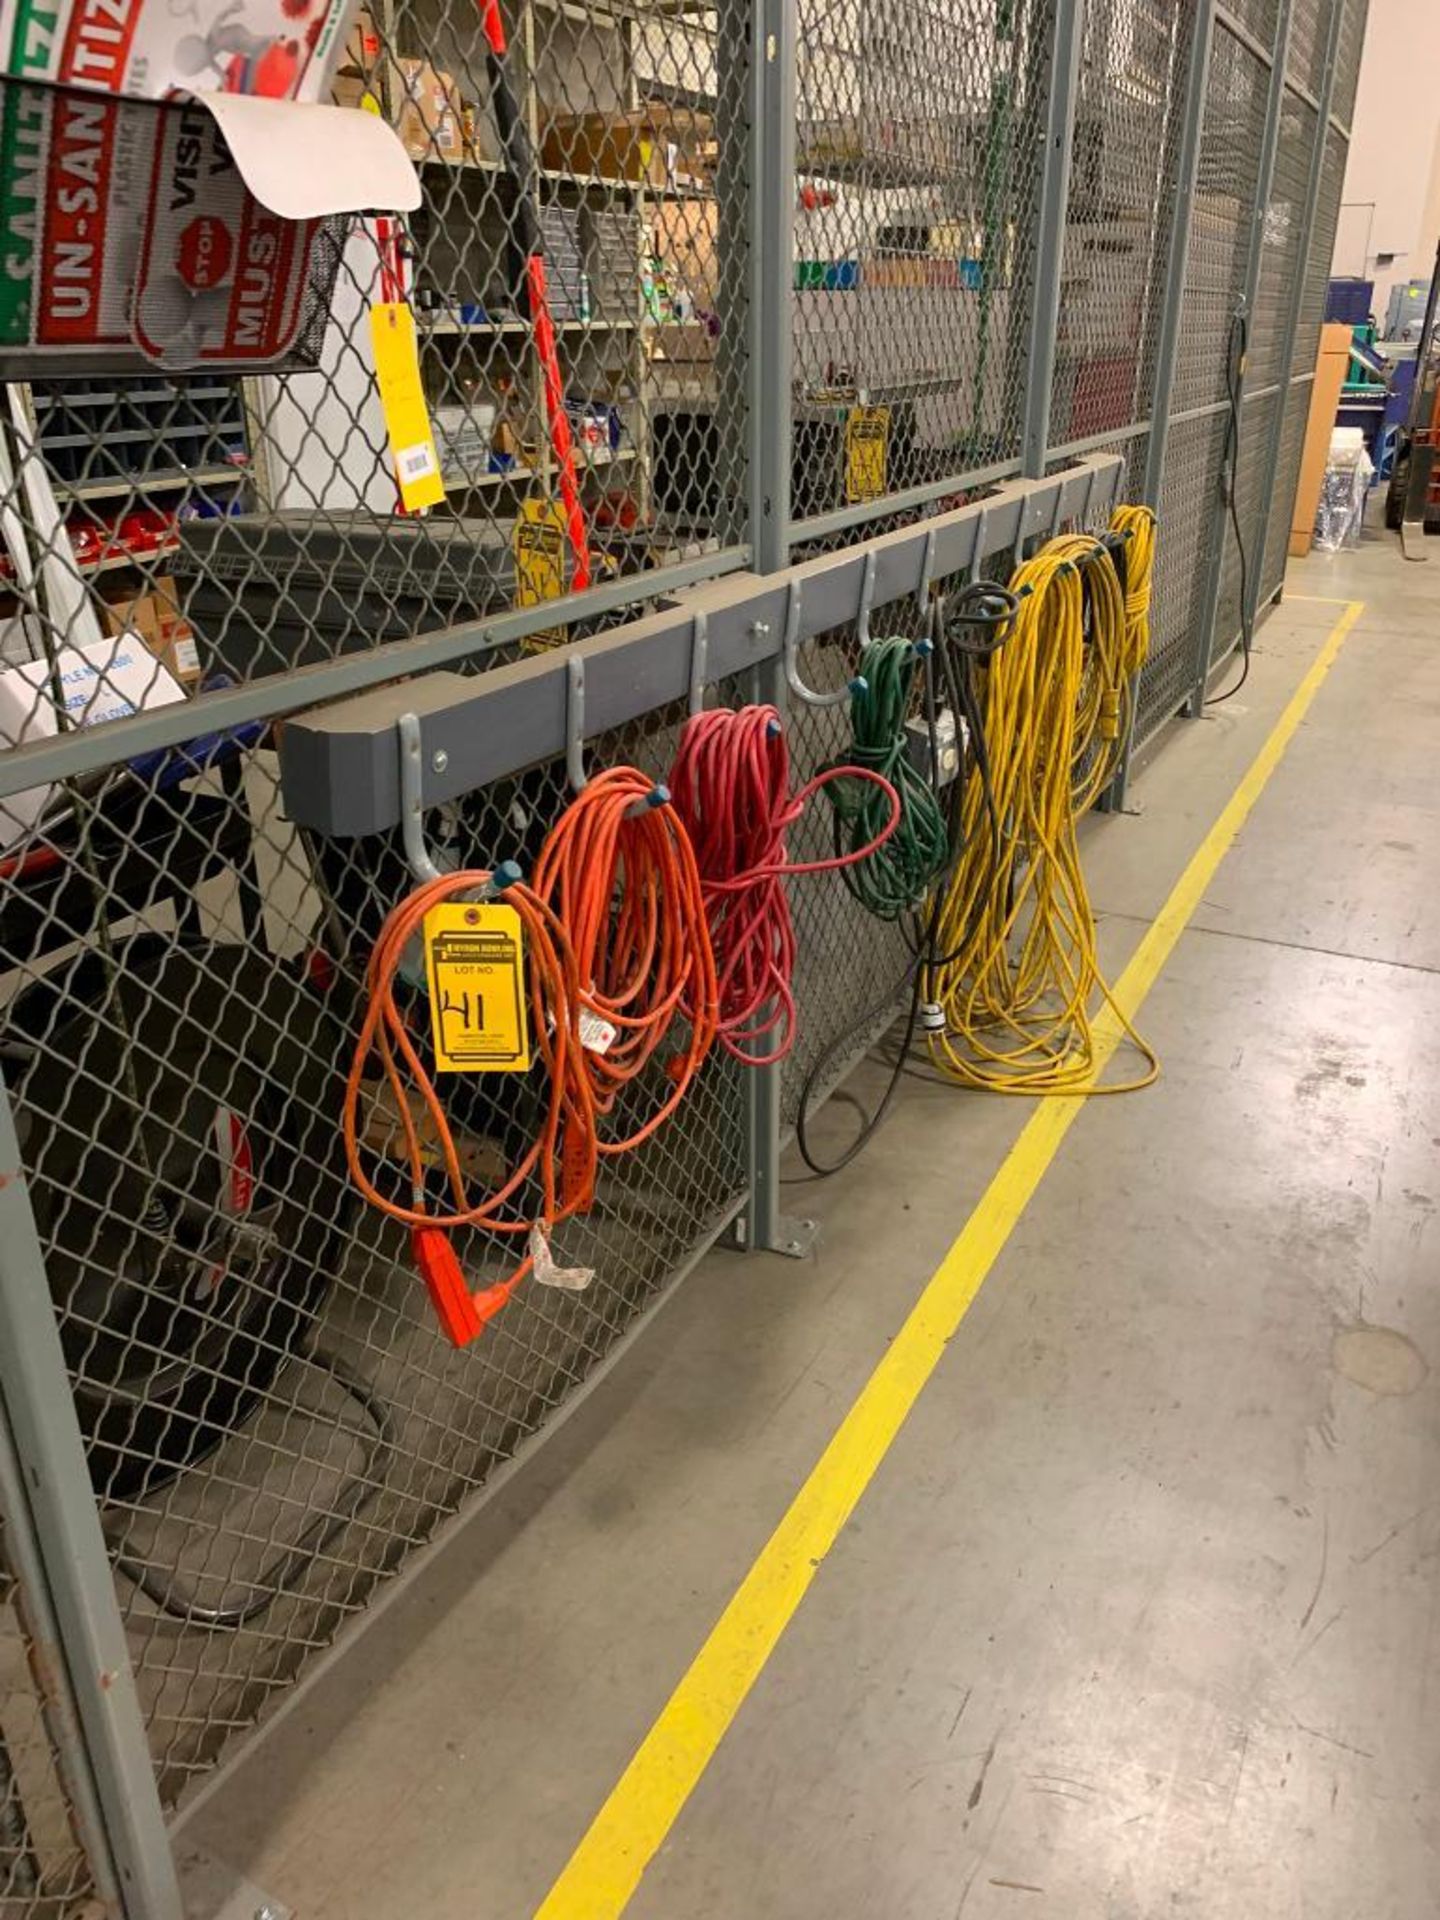 Tools Hanging on Pegboard, Bolt Cutters, Measuring Wheel, Extension Cords Hanging on Outside of Cage - Image 2 of 3